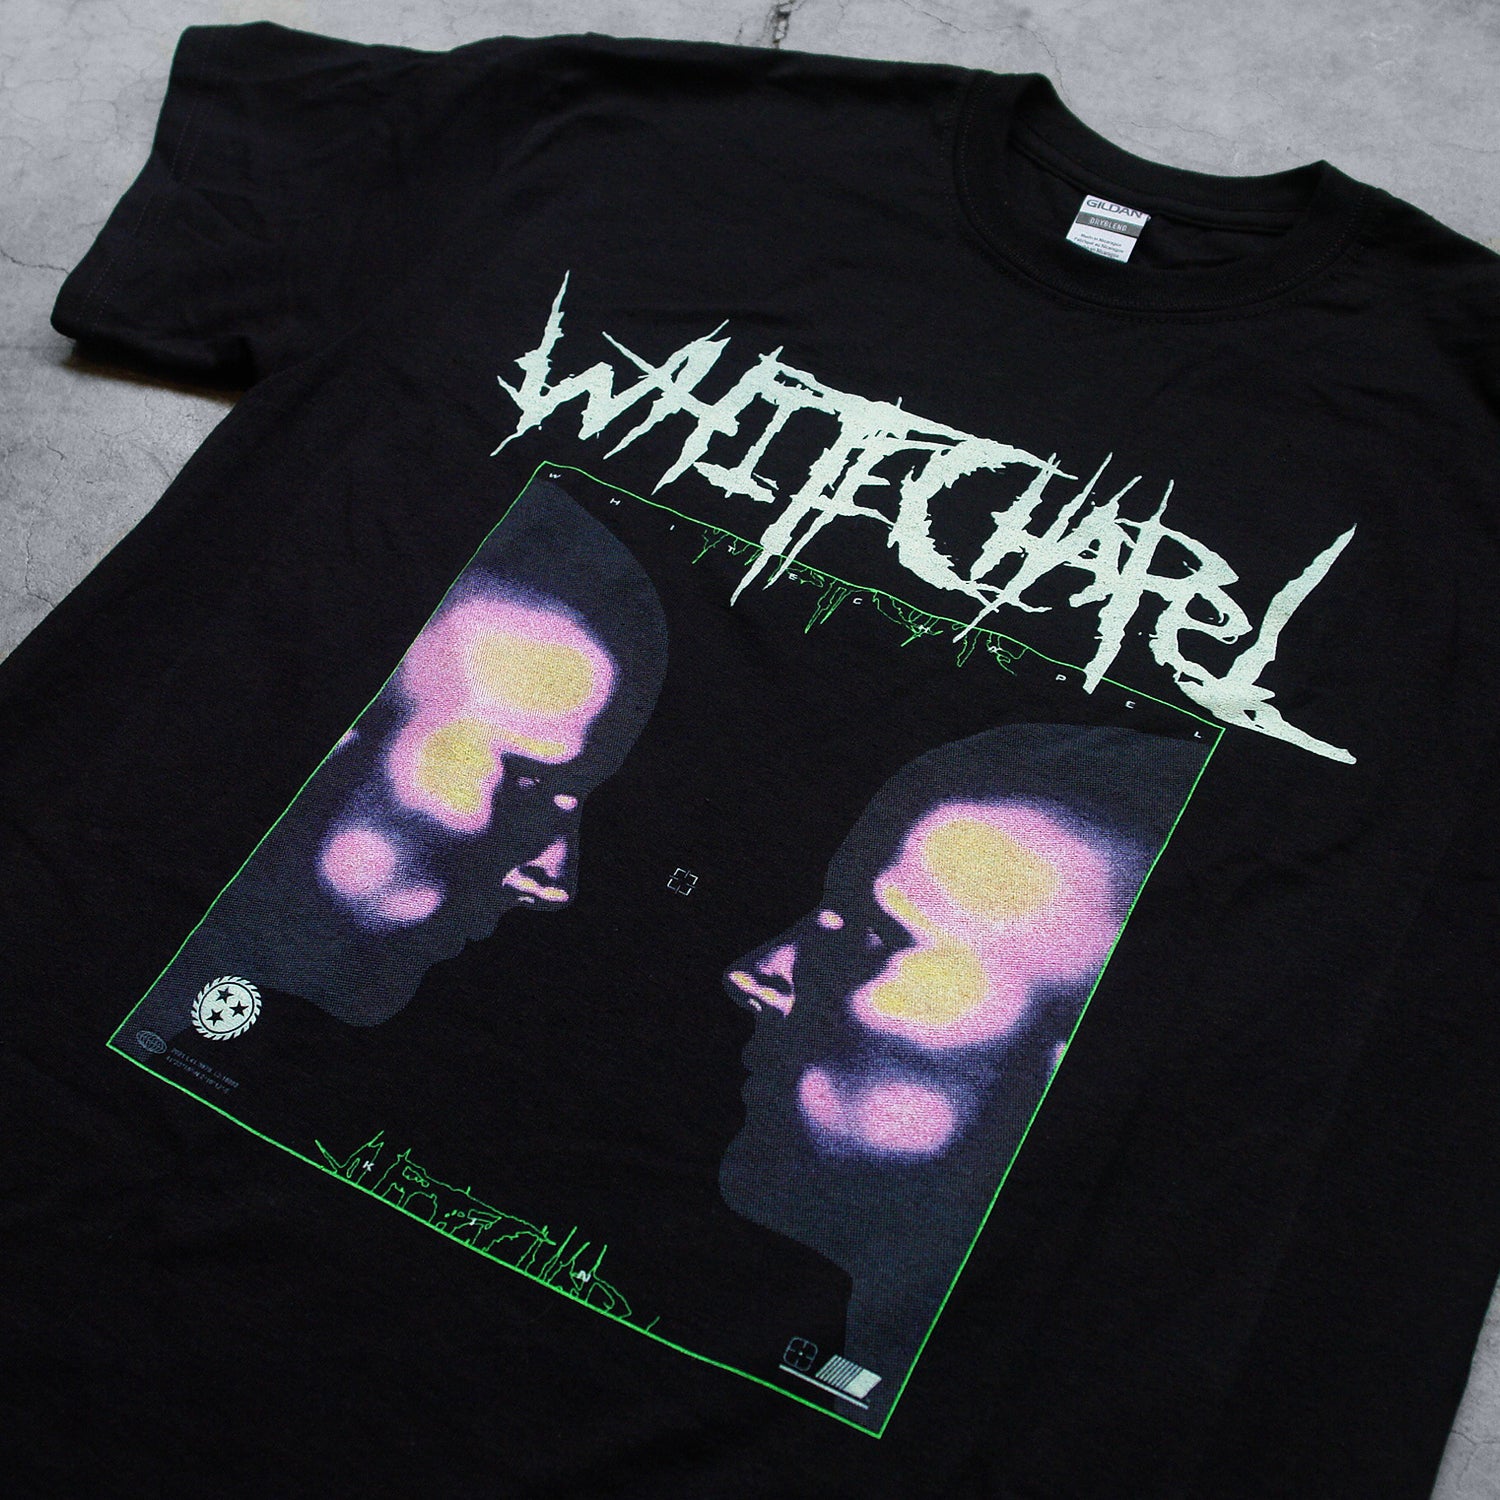 up close Image of a black tshirt against a grey concrete background. Across the chest of the shirt in white heavy metal font reads "whitechapel". Below this there is a green outline of a square. The inside of the square features a graphic of the side profiles of two faces. They have pink, yellow, and blue splotches on their heads and noses. There is a small white sawblade with three stars in the center of it on the right side of the shirt. 